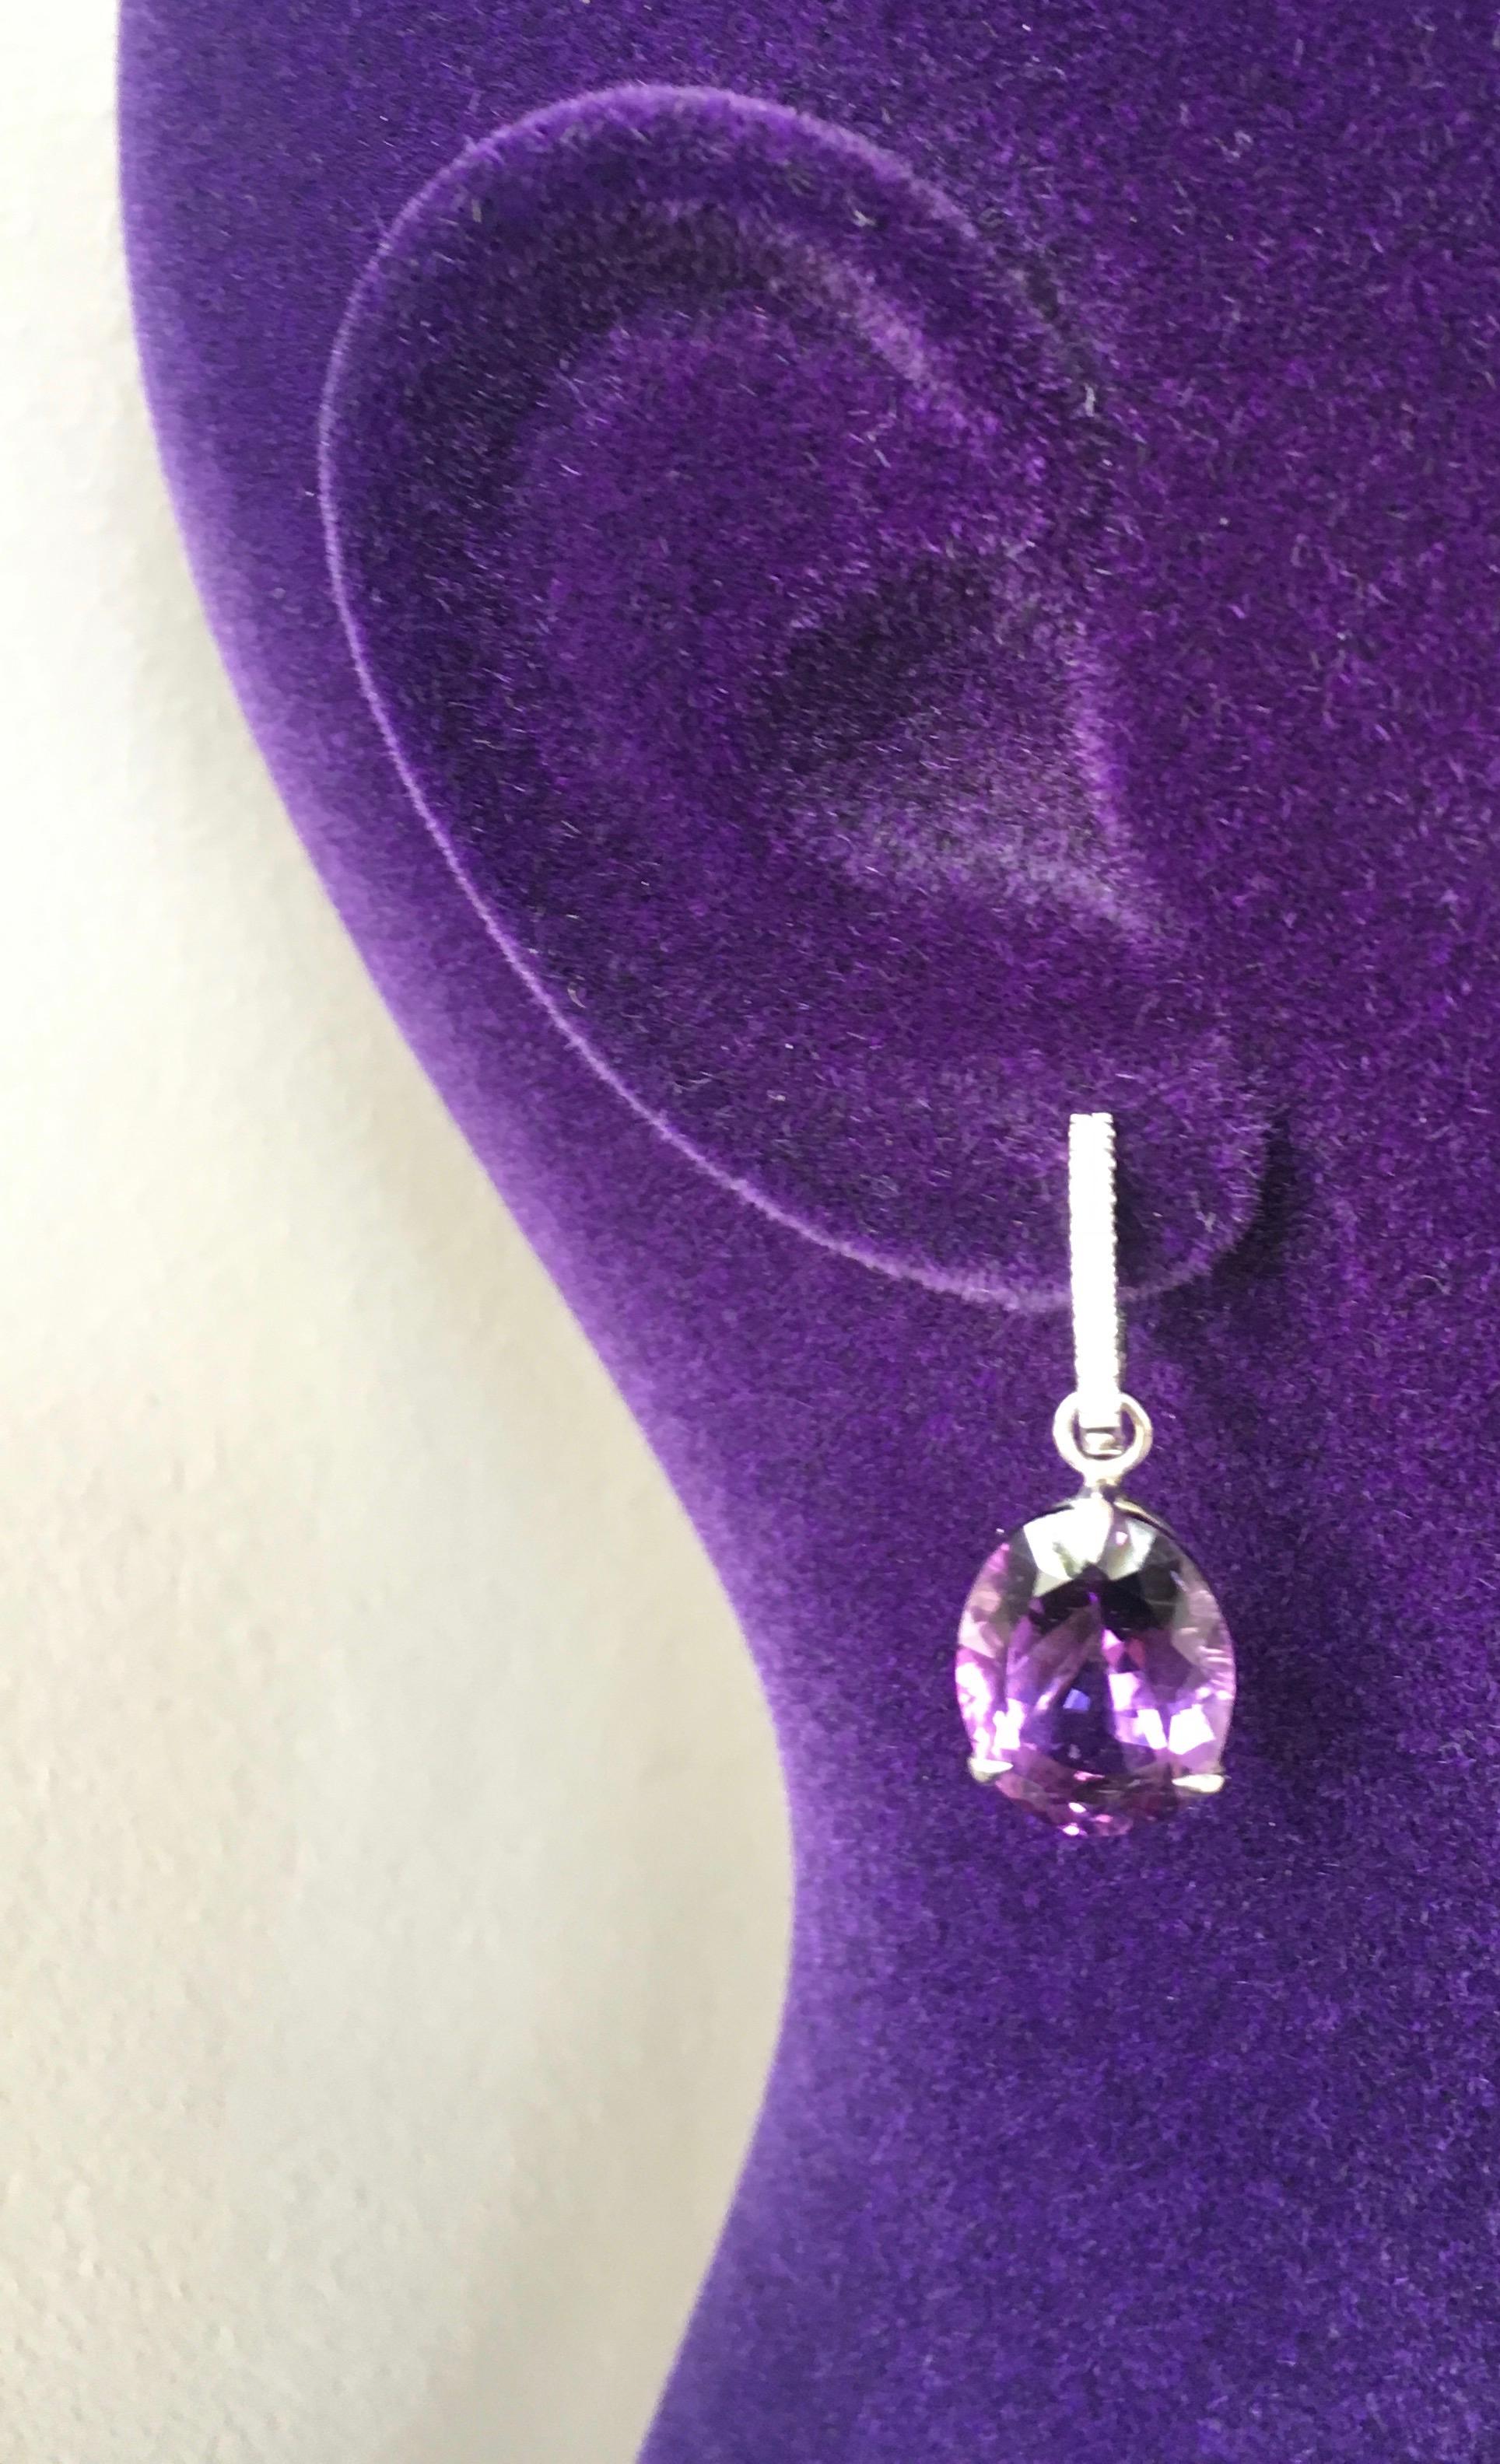 Oval cut intense purple amethyst drops hang from a pair of 18 Karat gold pave set diamond oval hoops.  The drops are detachable, the hoops can be worn on their own or with other gemstones or pearls. 

Diamond oval hoops 0.20 cts. F/VVS
Amethyst: